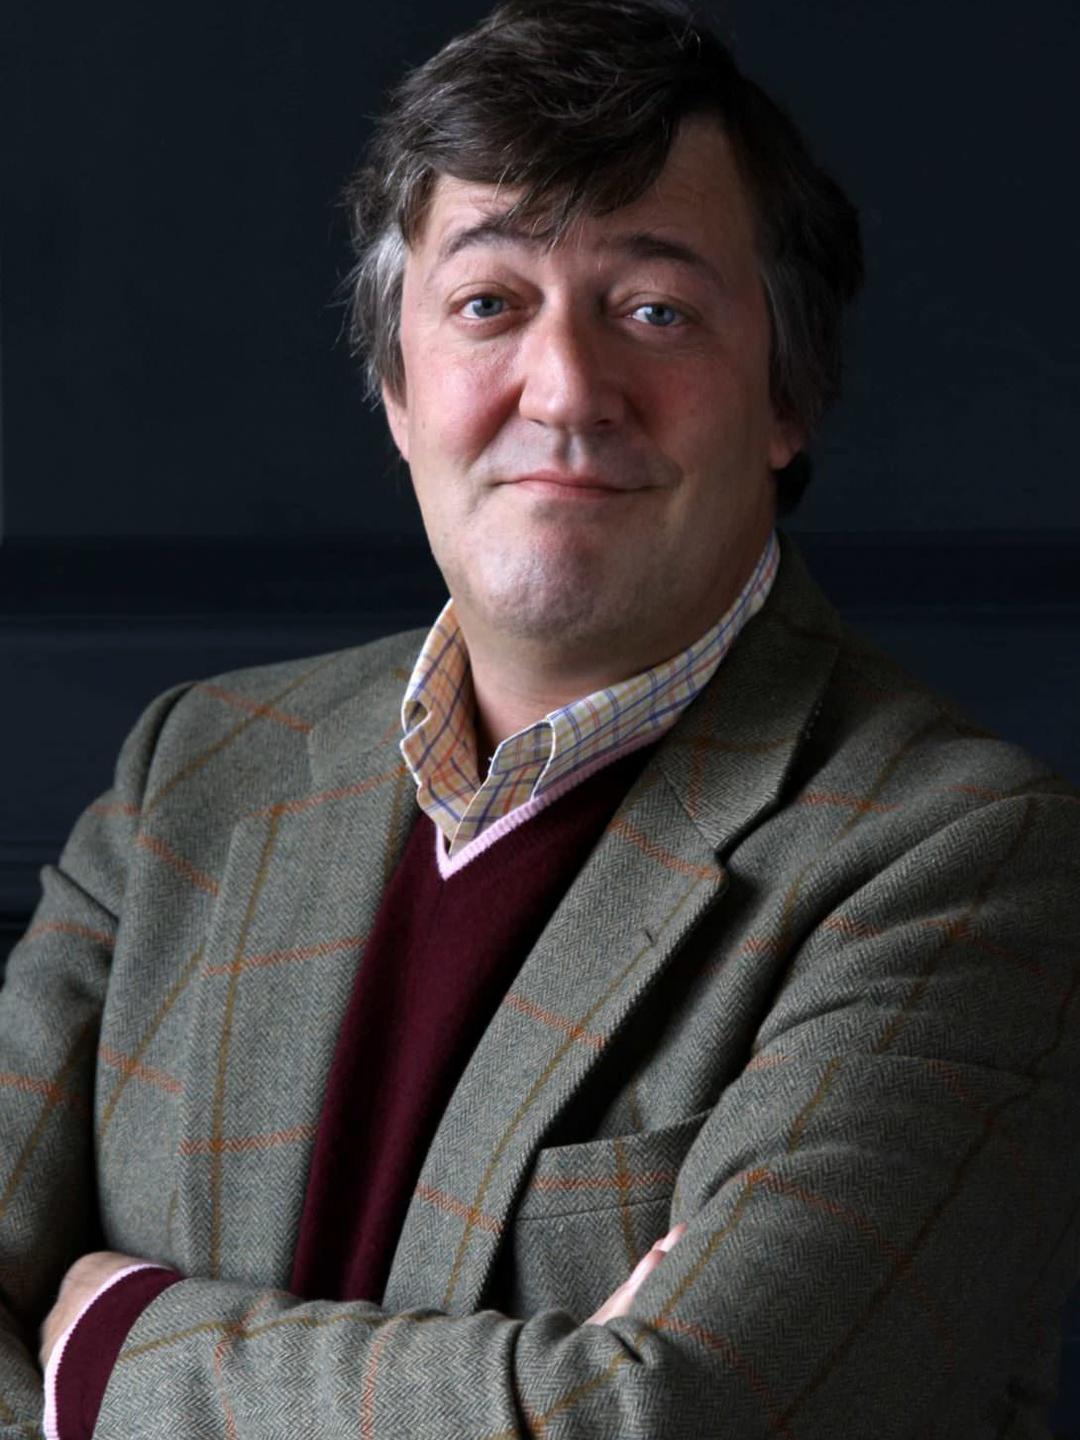 Stephen Fry does he have kids